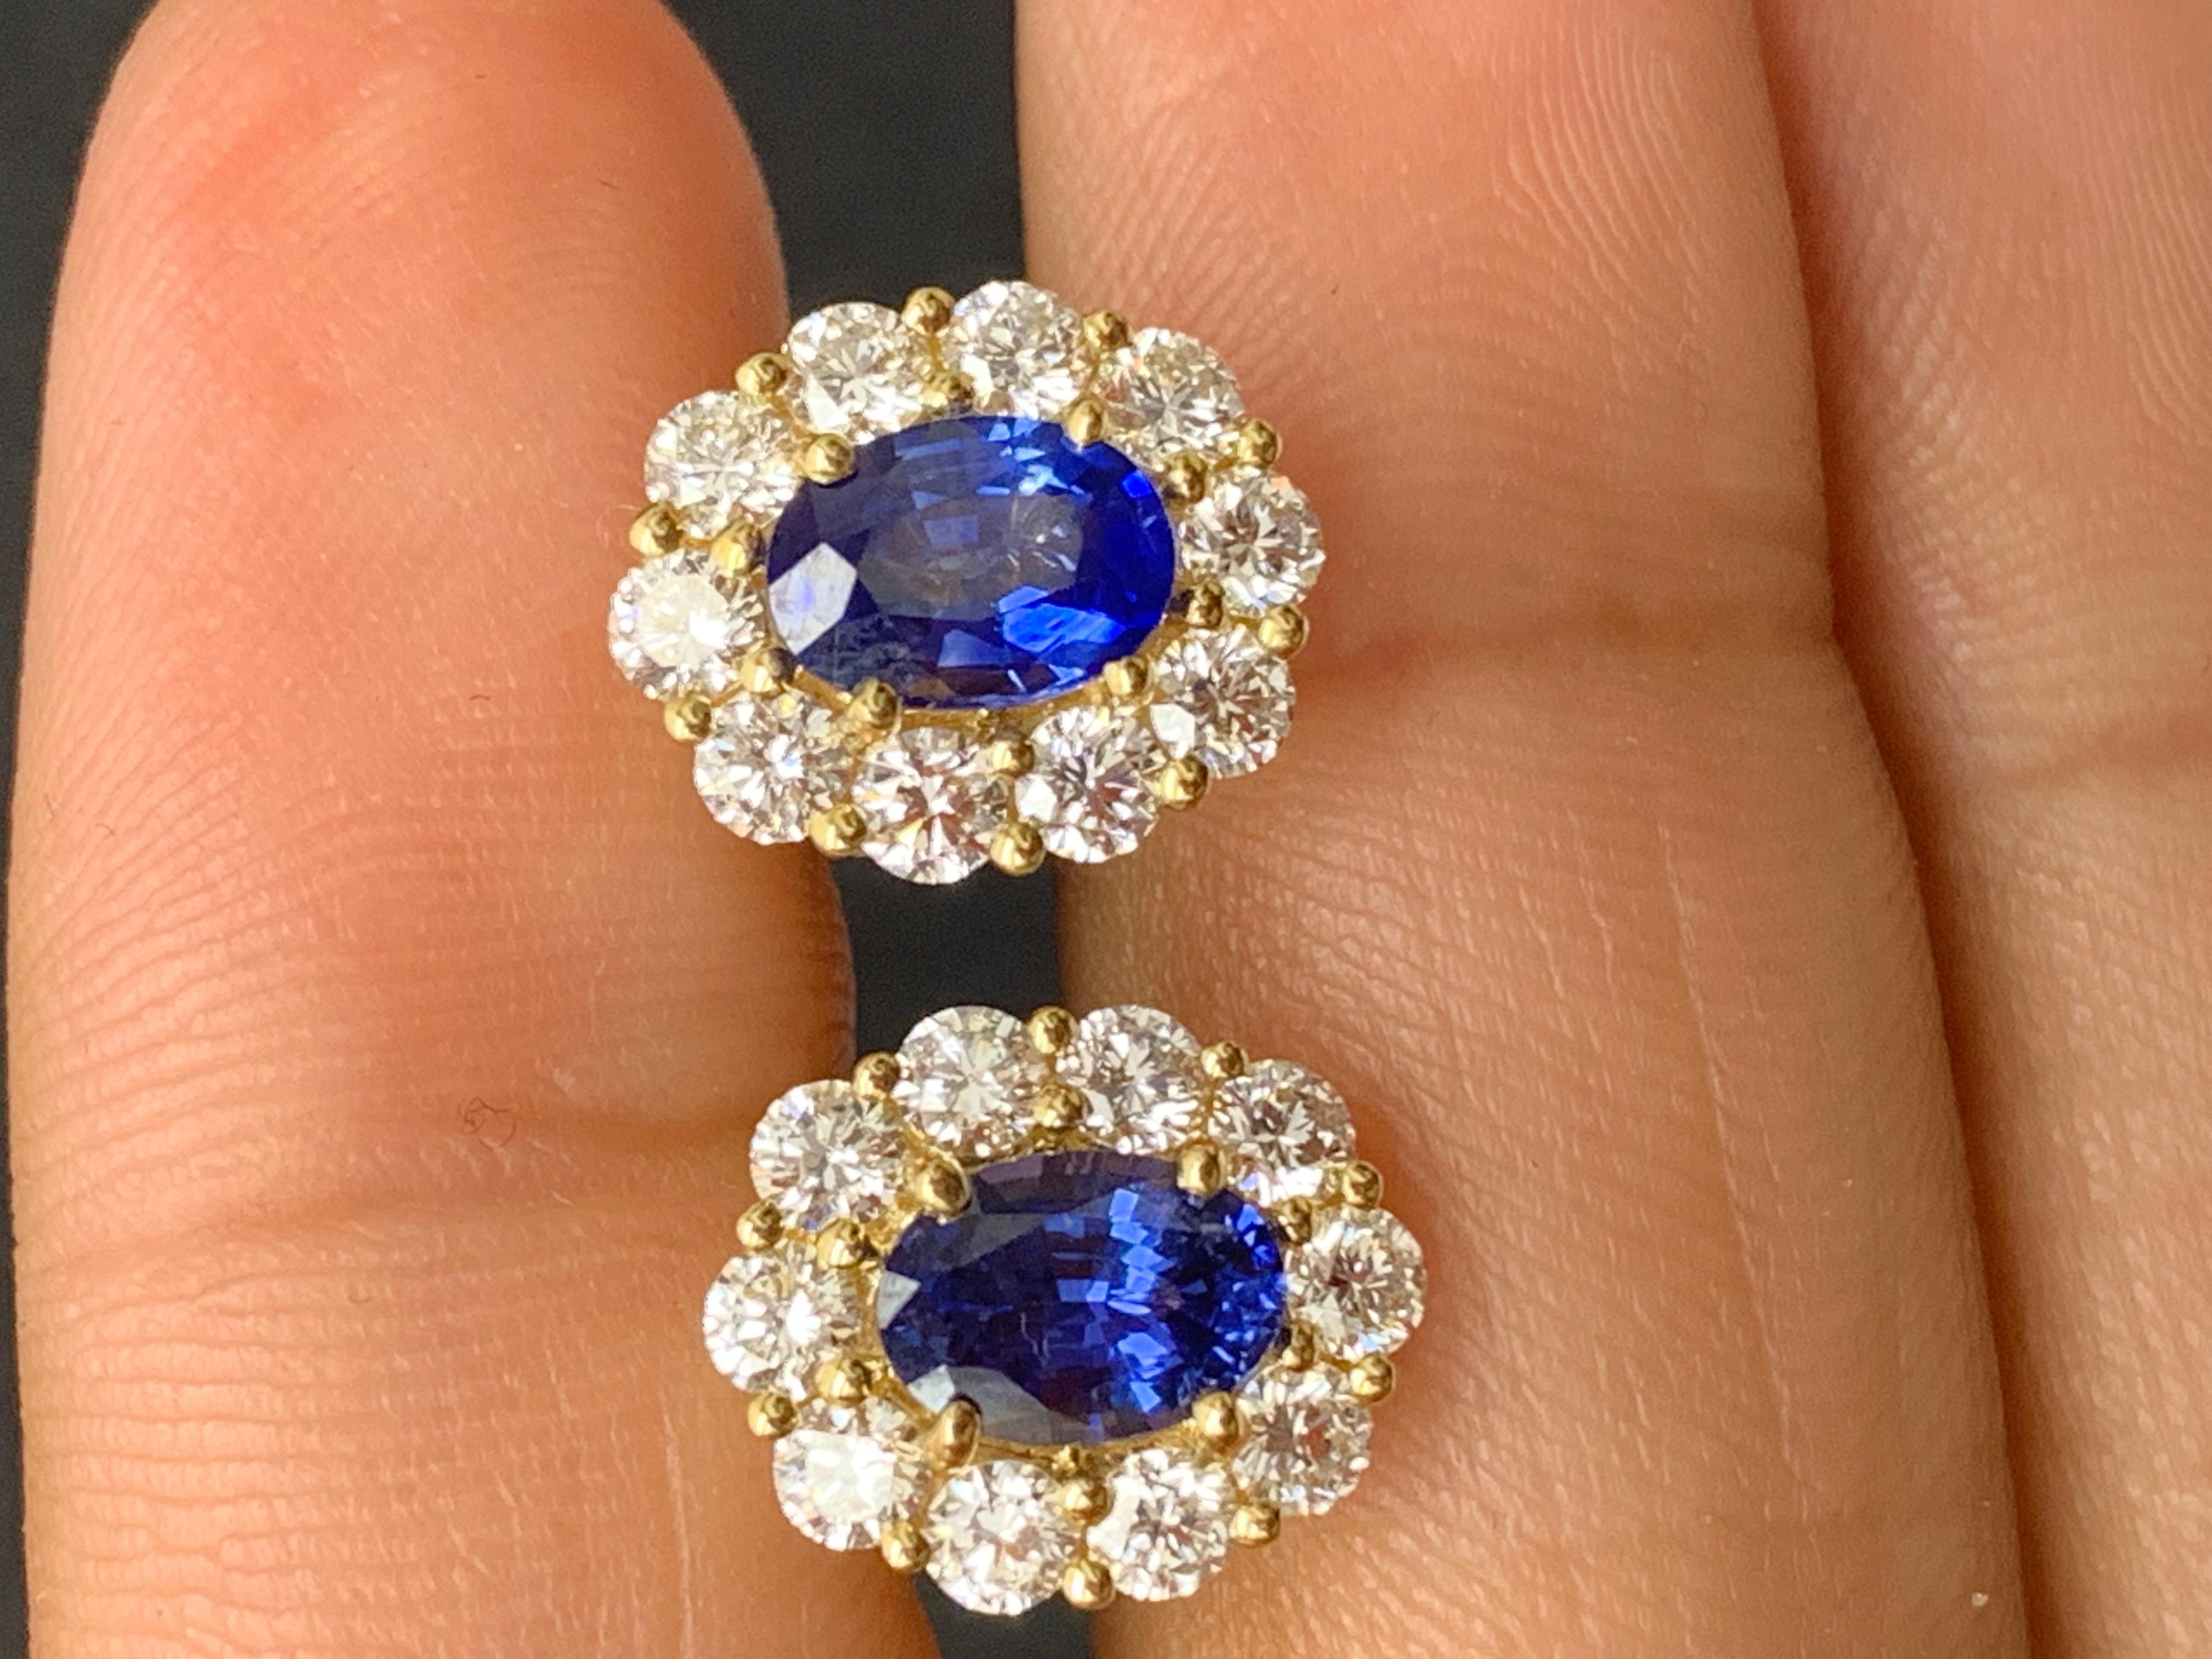 A simple pair of stud earrings showcasing 1.60 carats of 2 oval cut lush blue sapphires, surrounded by a single row of 20 round brilliant diamonds weighing 1.35 carats. Made in 18-karat white gold.